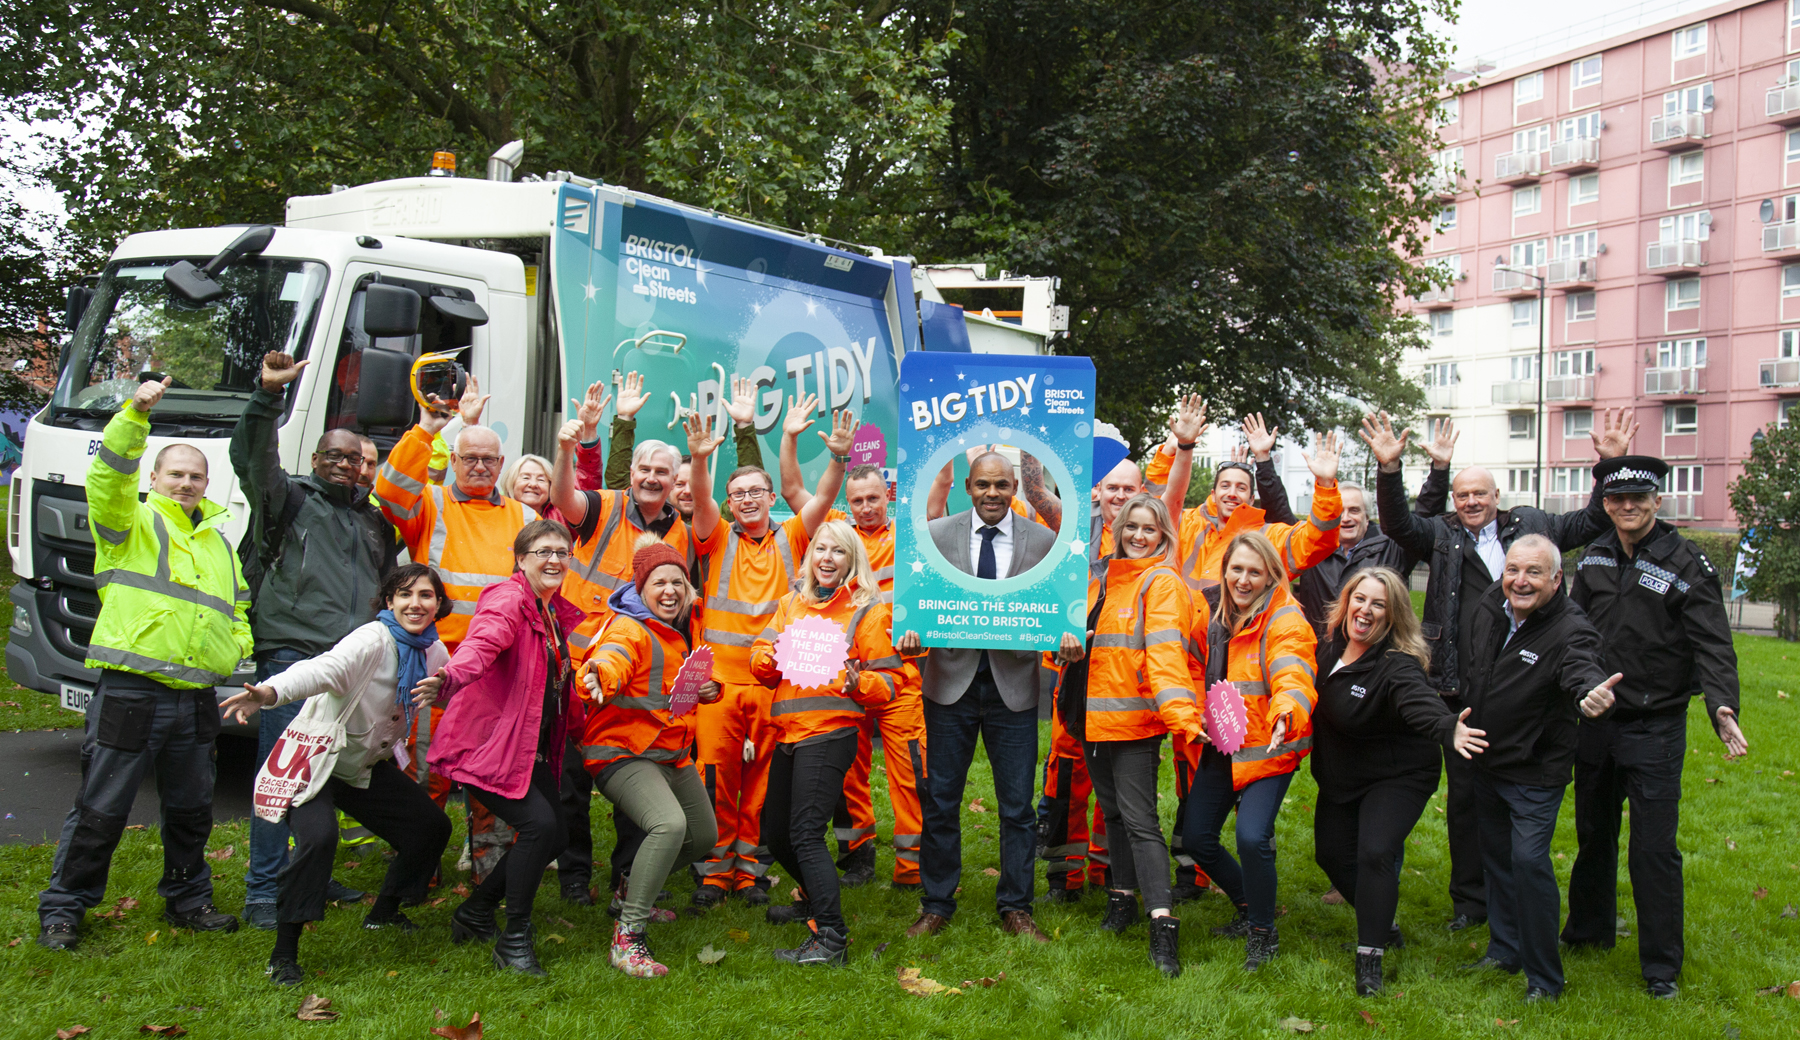 A group of Bristol Waste and Bristol City Council members, including Mayor Marvin Rees, pose in front of a Big Tidy street cleaning vehicle.